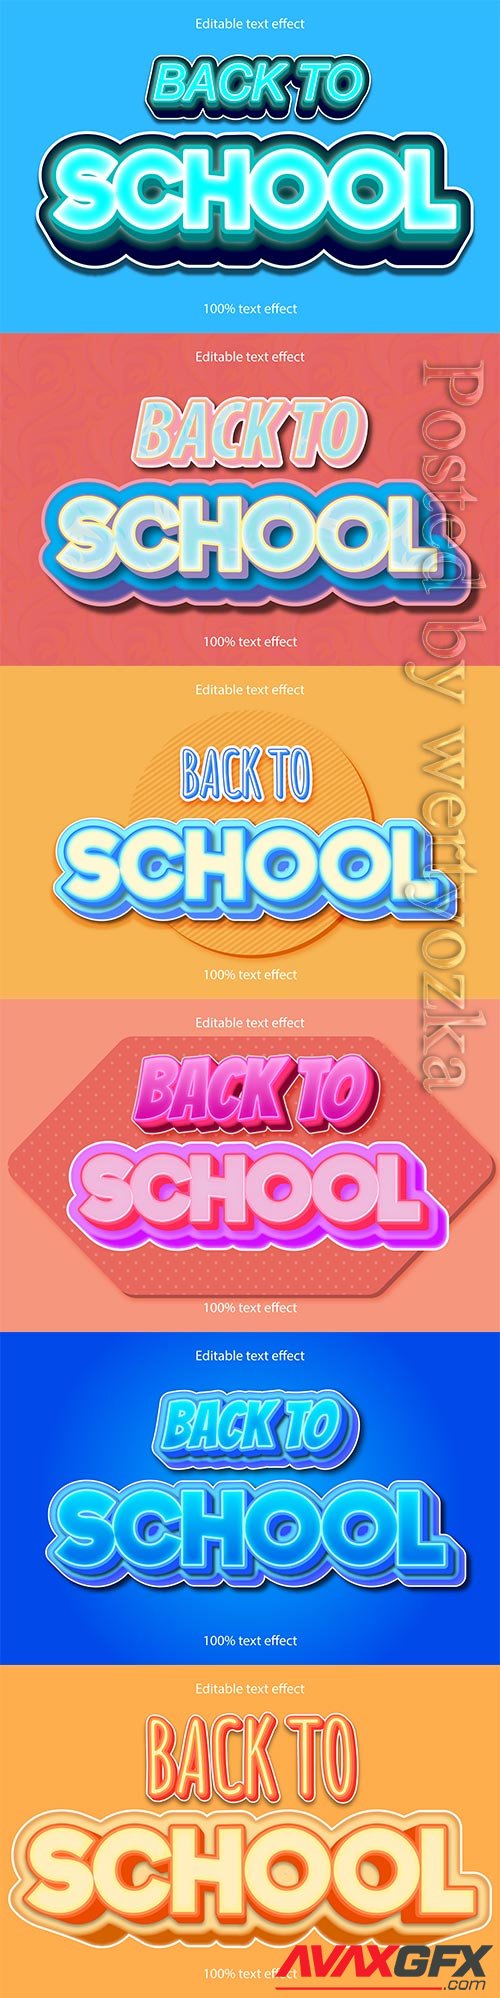 Back to school editable text effect vol 4